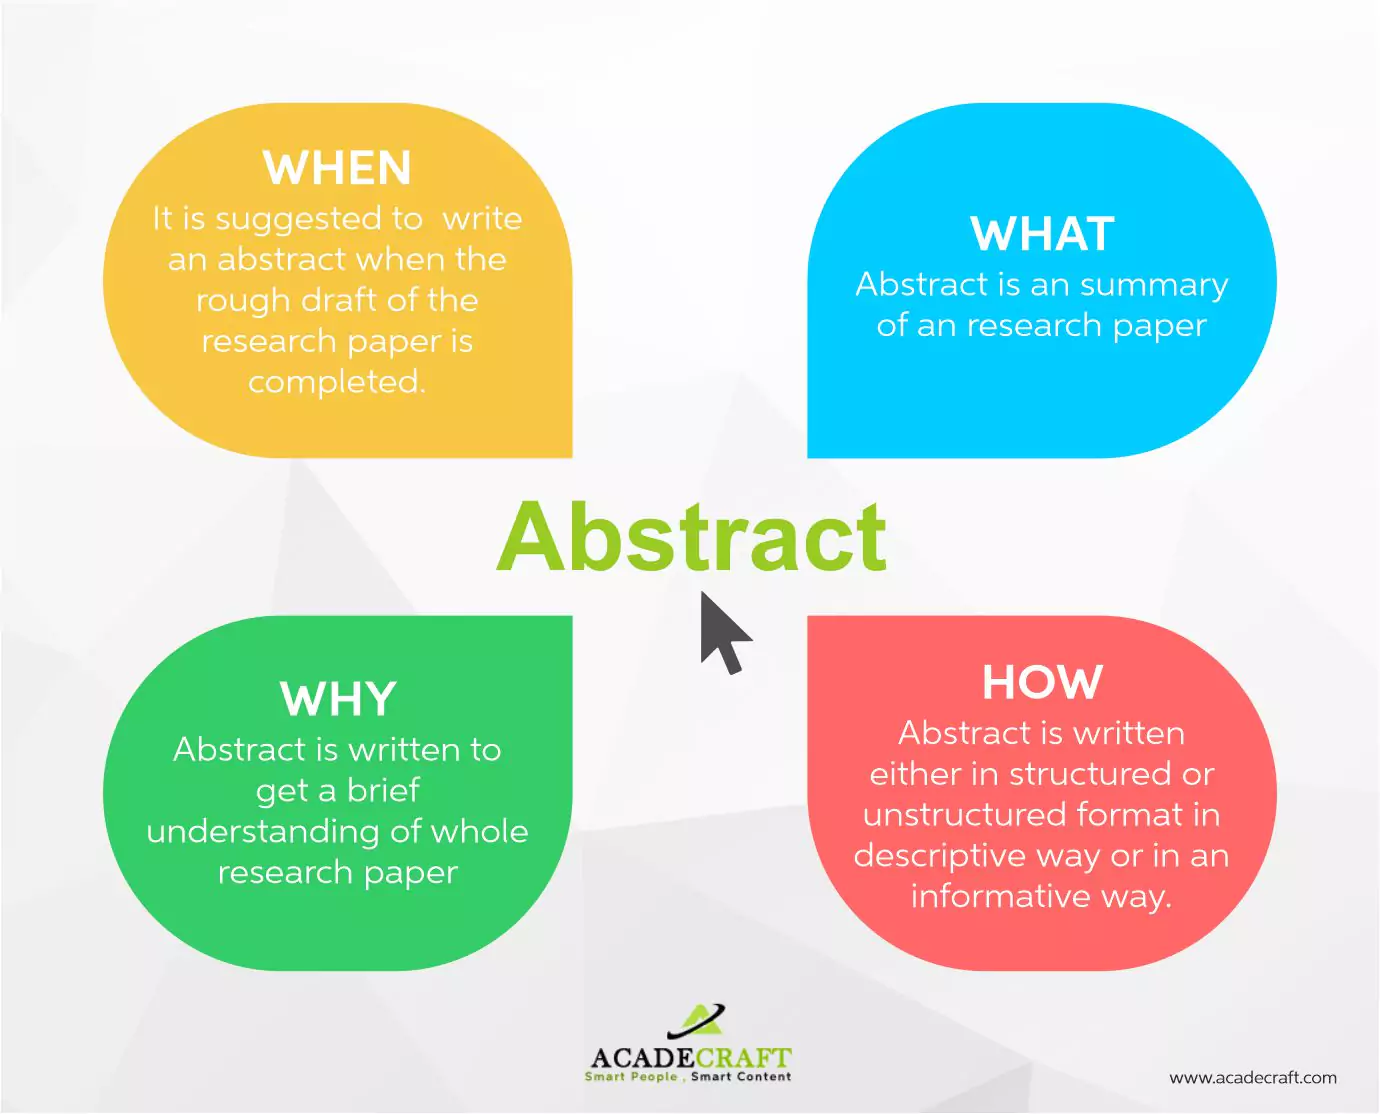 Abstract for a research paper'